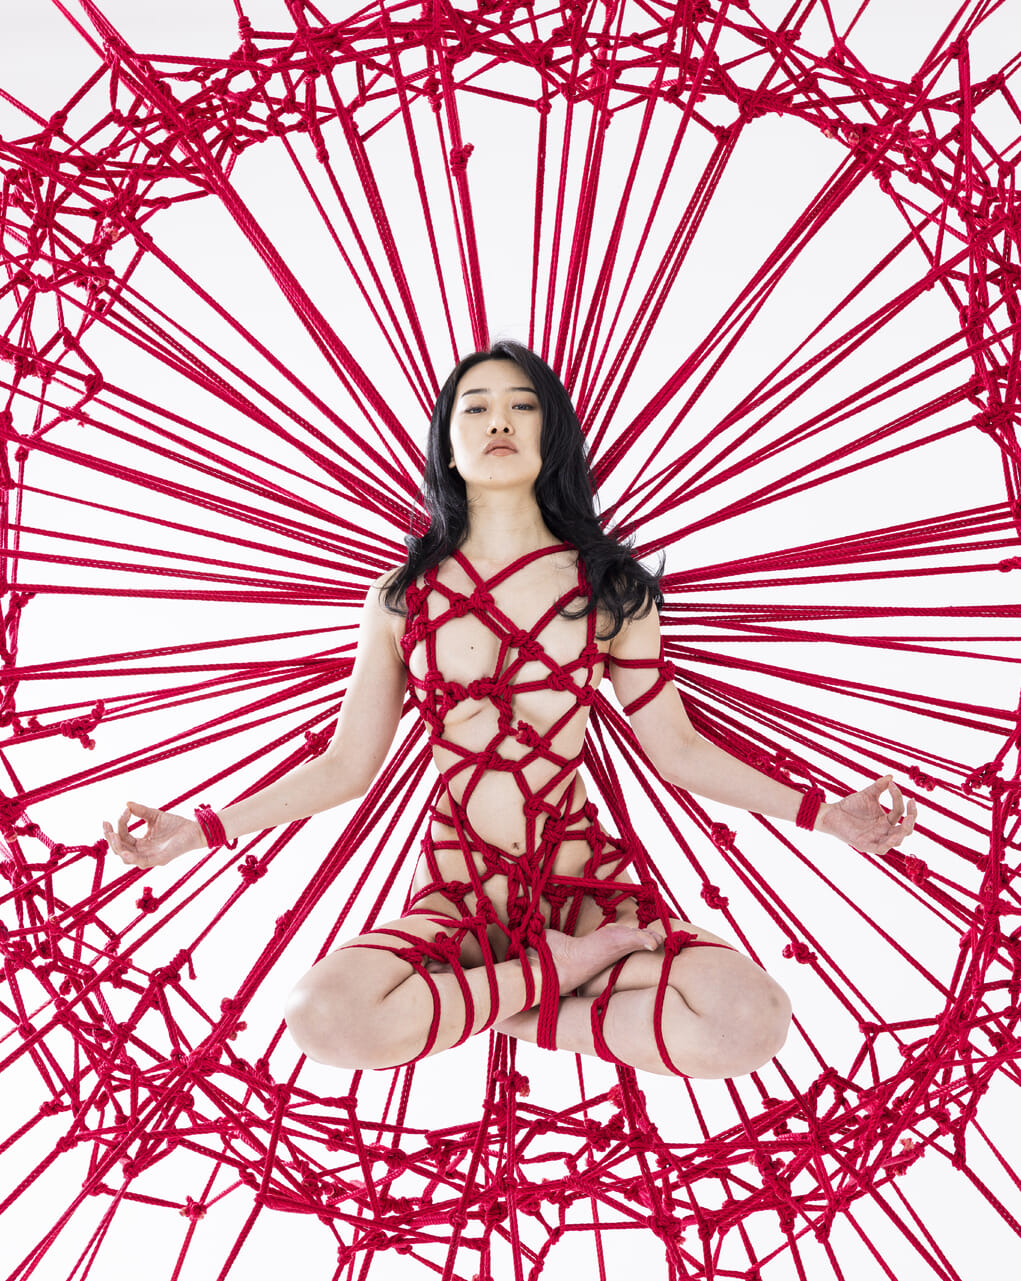 Learn about the art of Japanese rope bondage at the Shibari Art Fair 2023